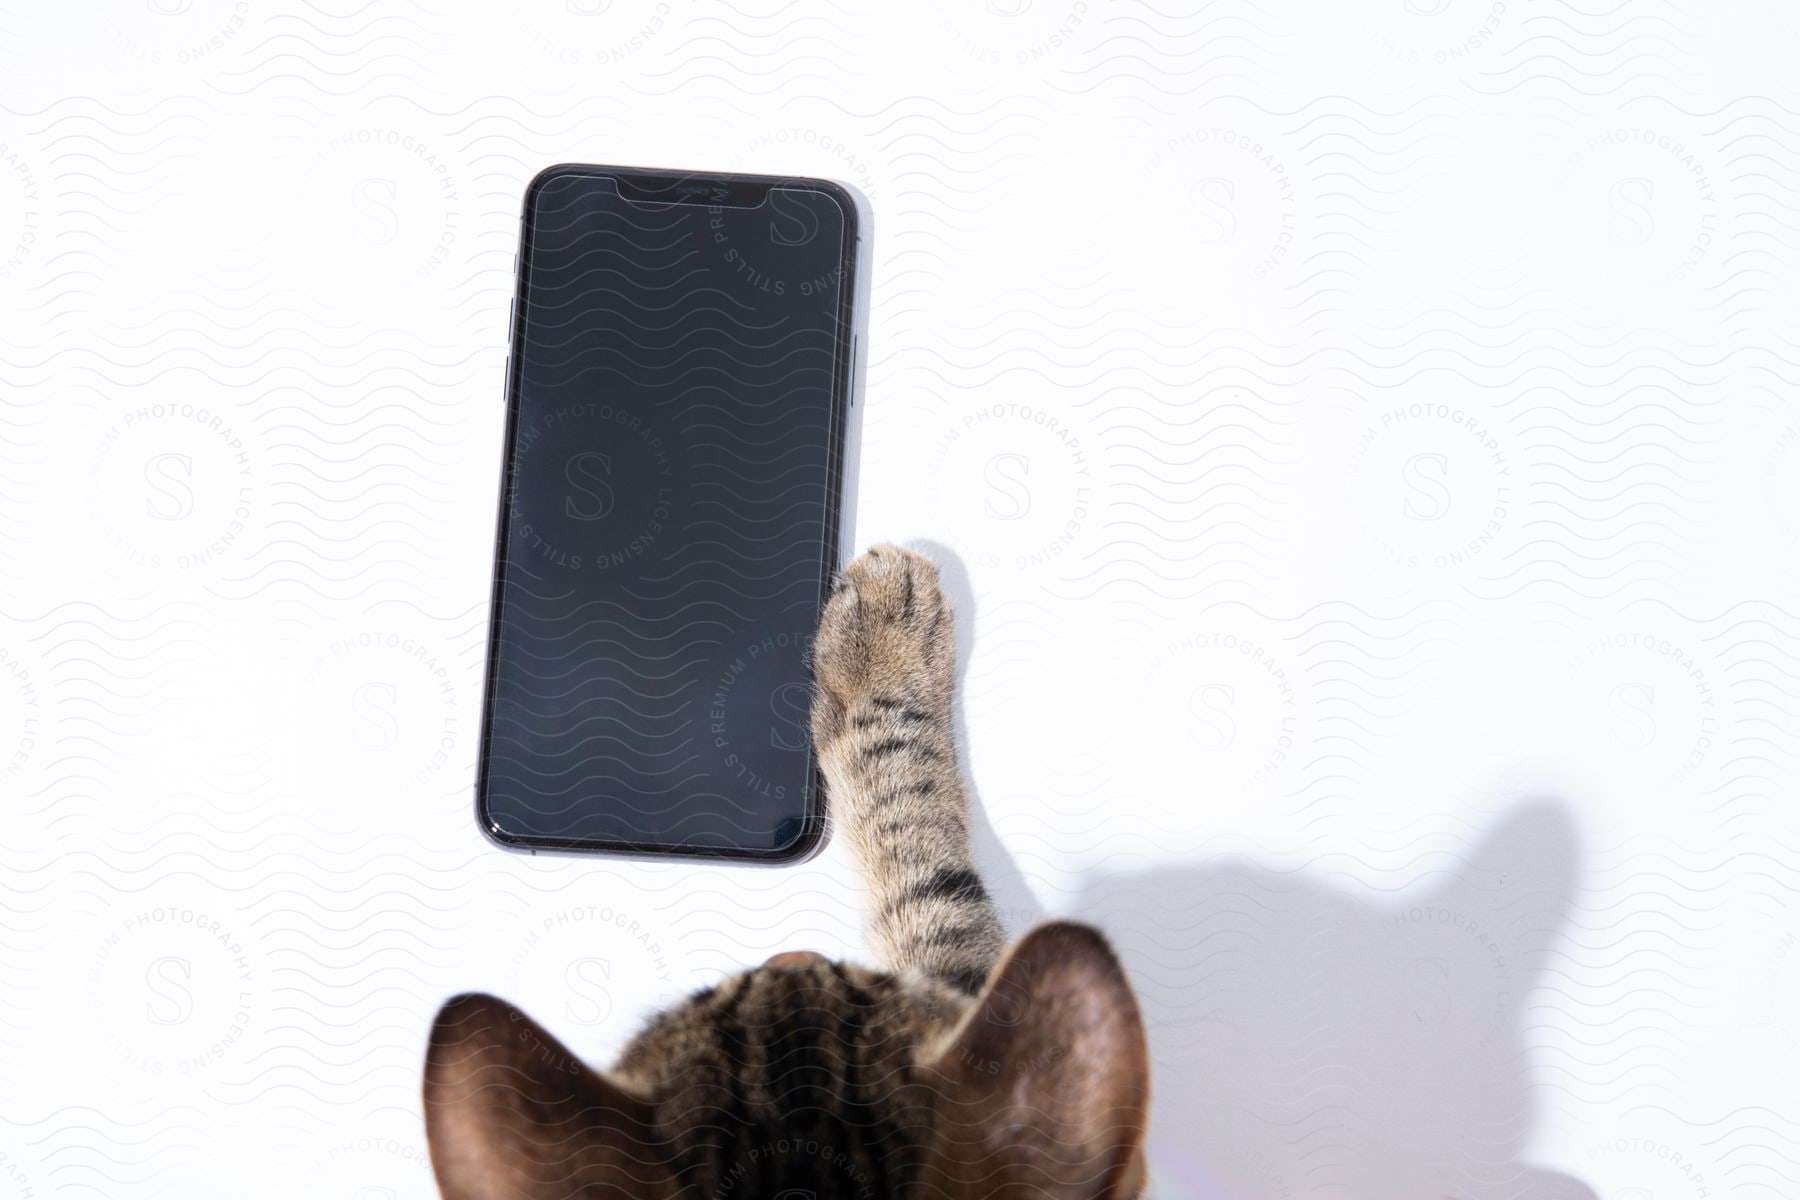 Cat touches edge of smartphone.